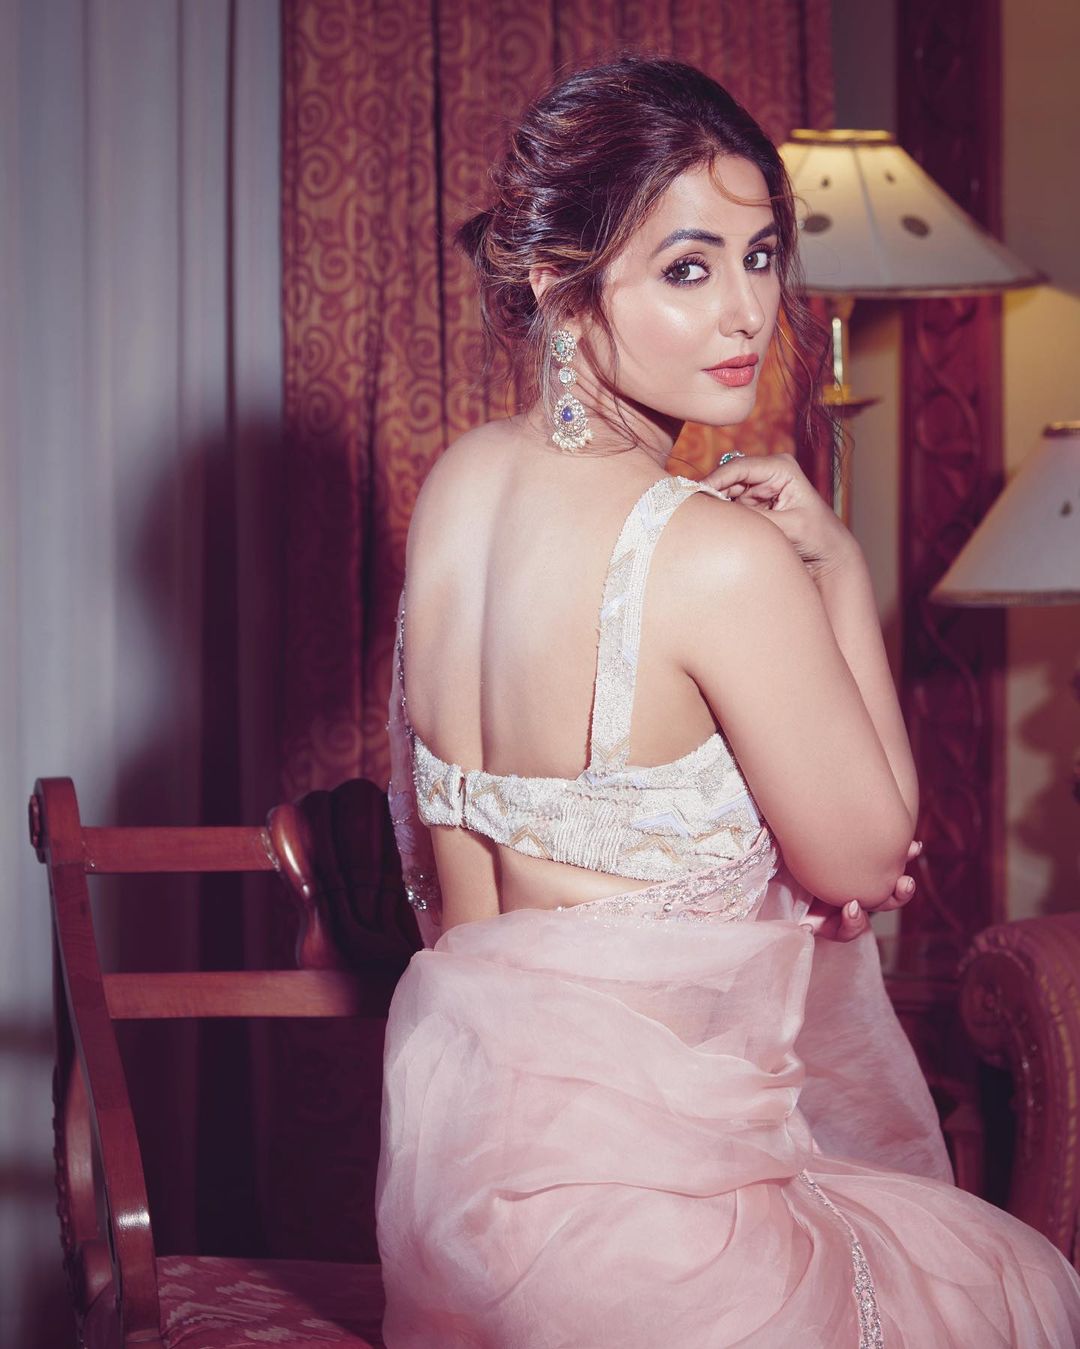 Hina Khan sure knows how to make heads turn with her photoshoots